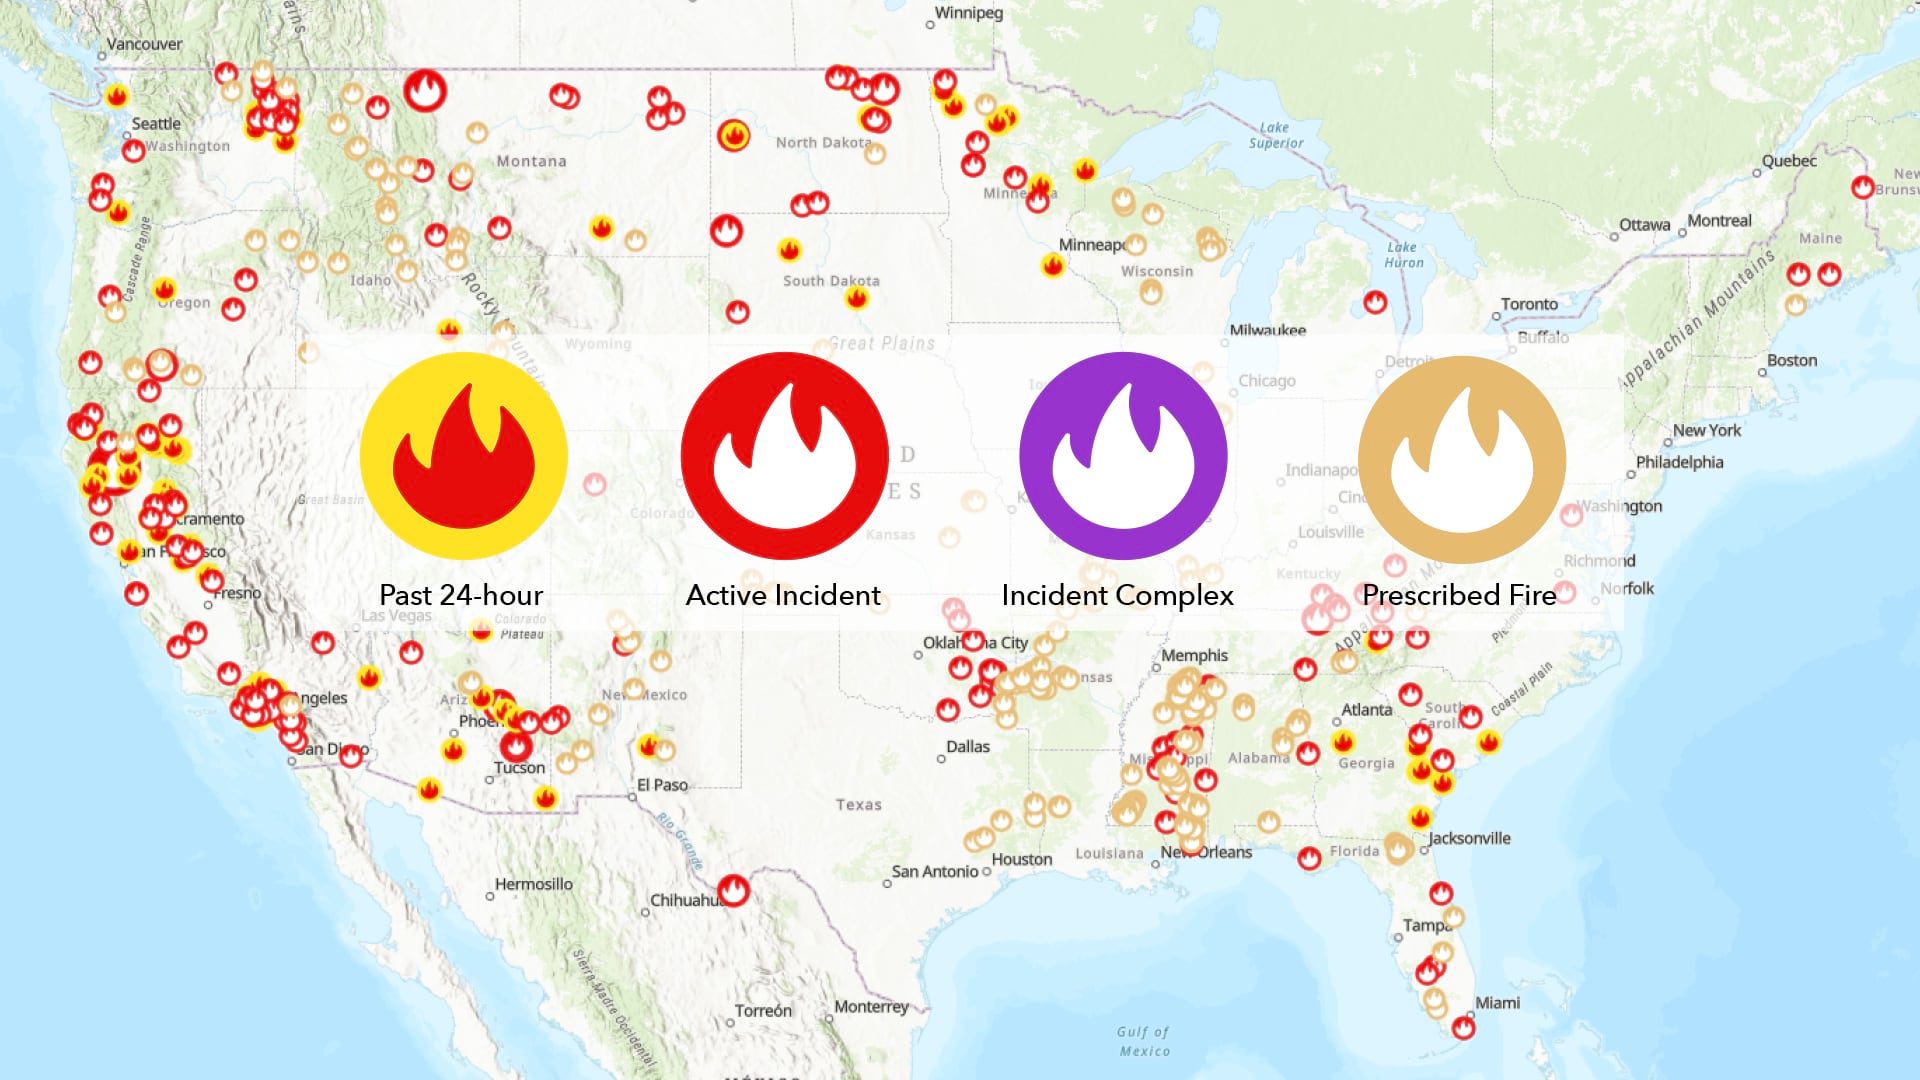 2021 USA Wildfires Live Feed Update